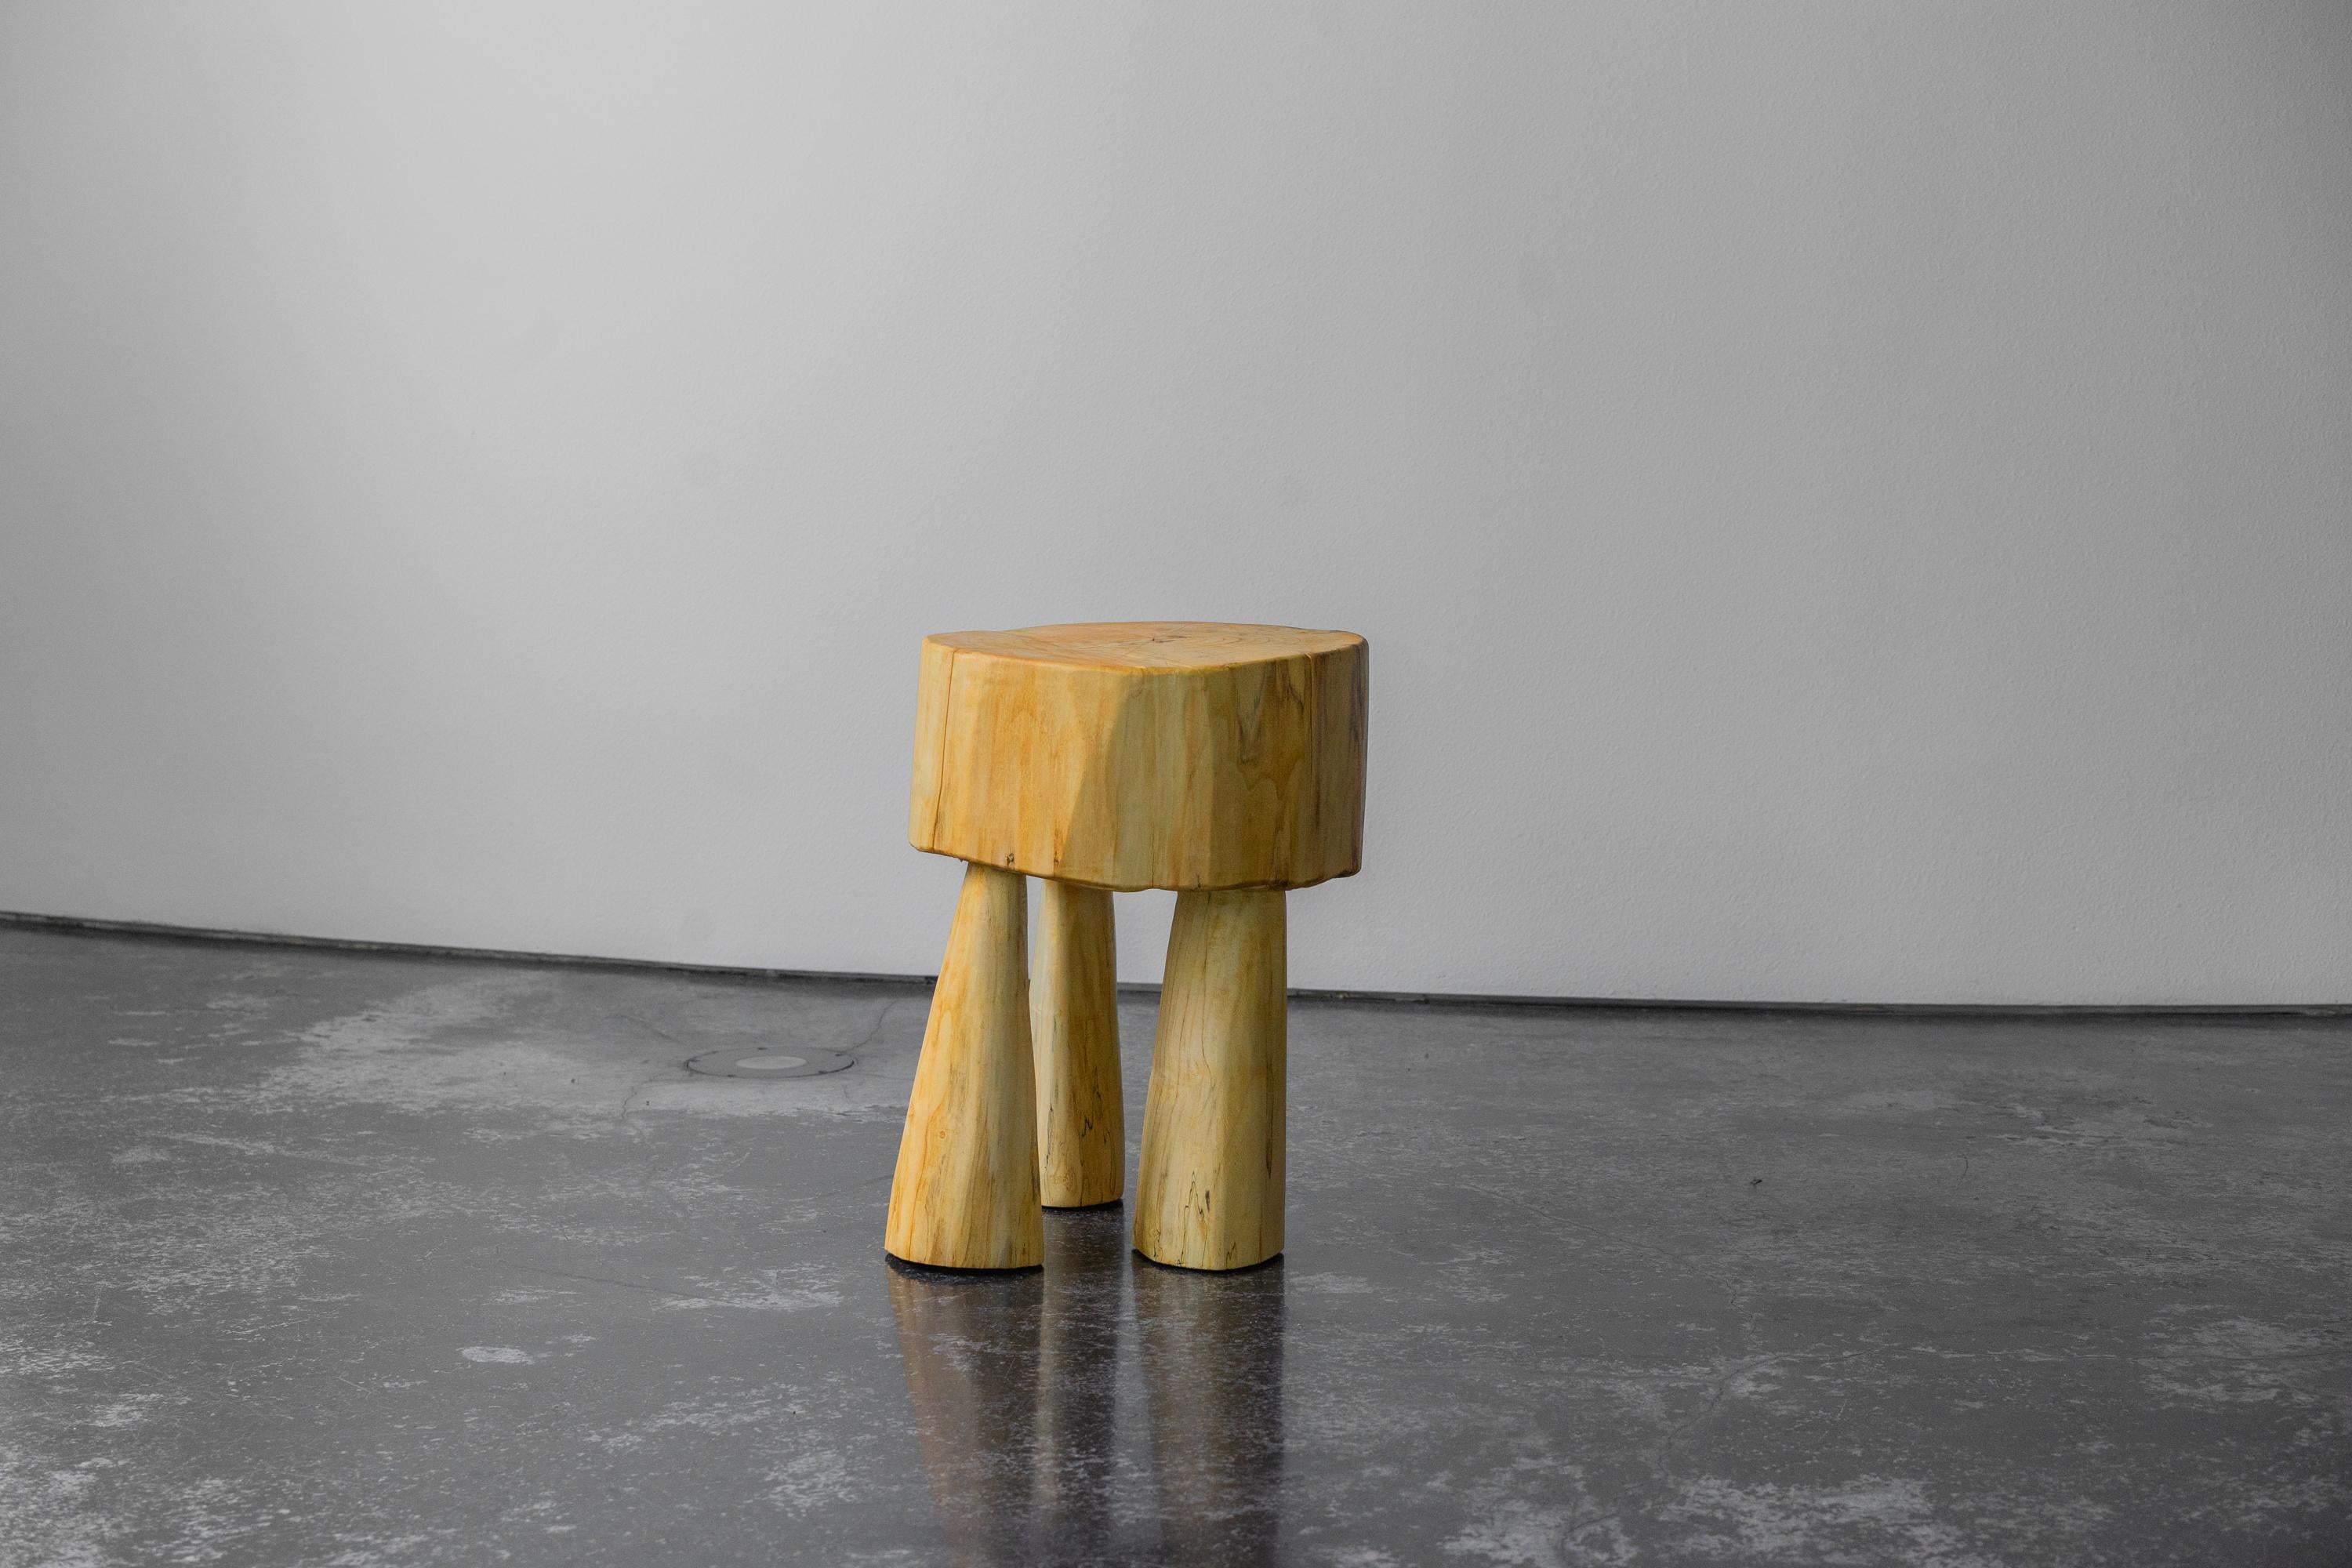 Gela stool sculpted by Vince Skelly
Dimensions: H 50 x W 36 cm
Materials: Wood

All of his works are hand-sculpted by Vince Skelly from a single block, thus the item will be slightly different from the one in pictures.

Vince Skelly is attracted to